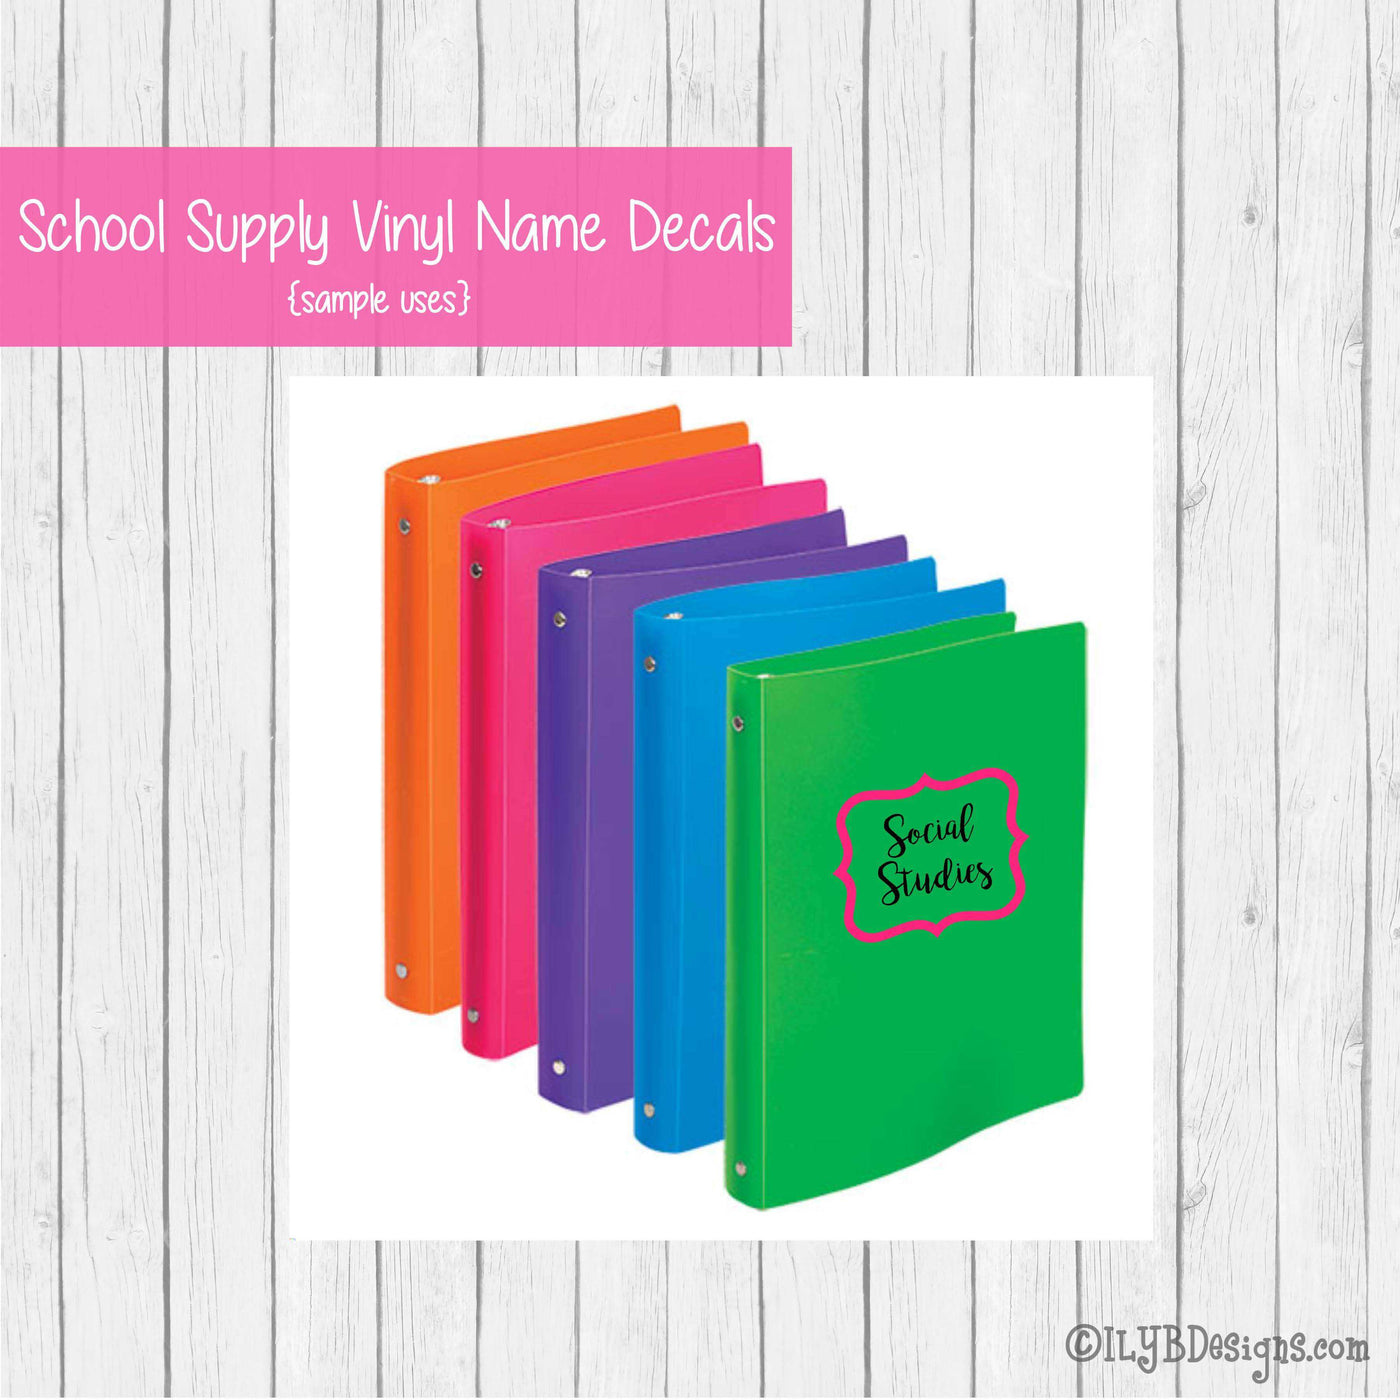 Back to School Subject Labels - CUSTOMIZED School Subject Labels for Girls - ILYB Designs